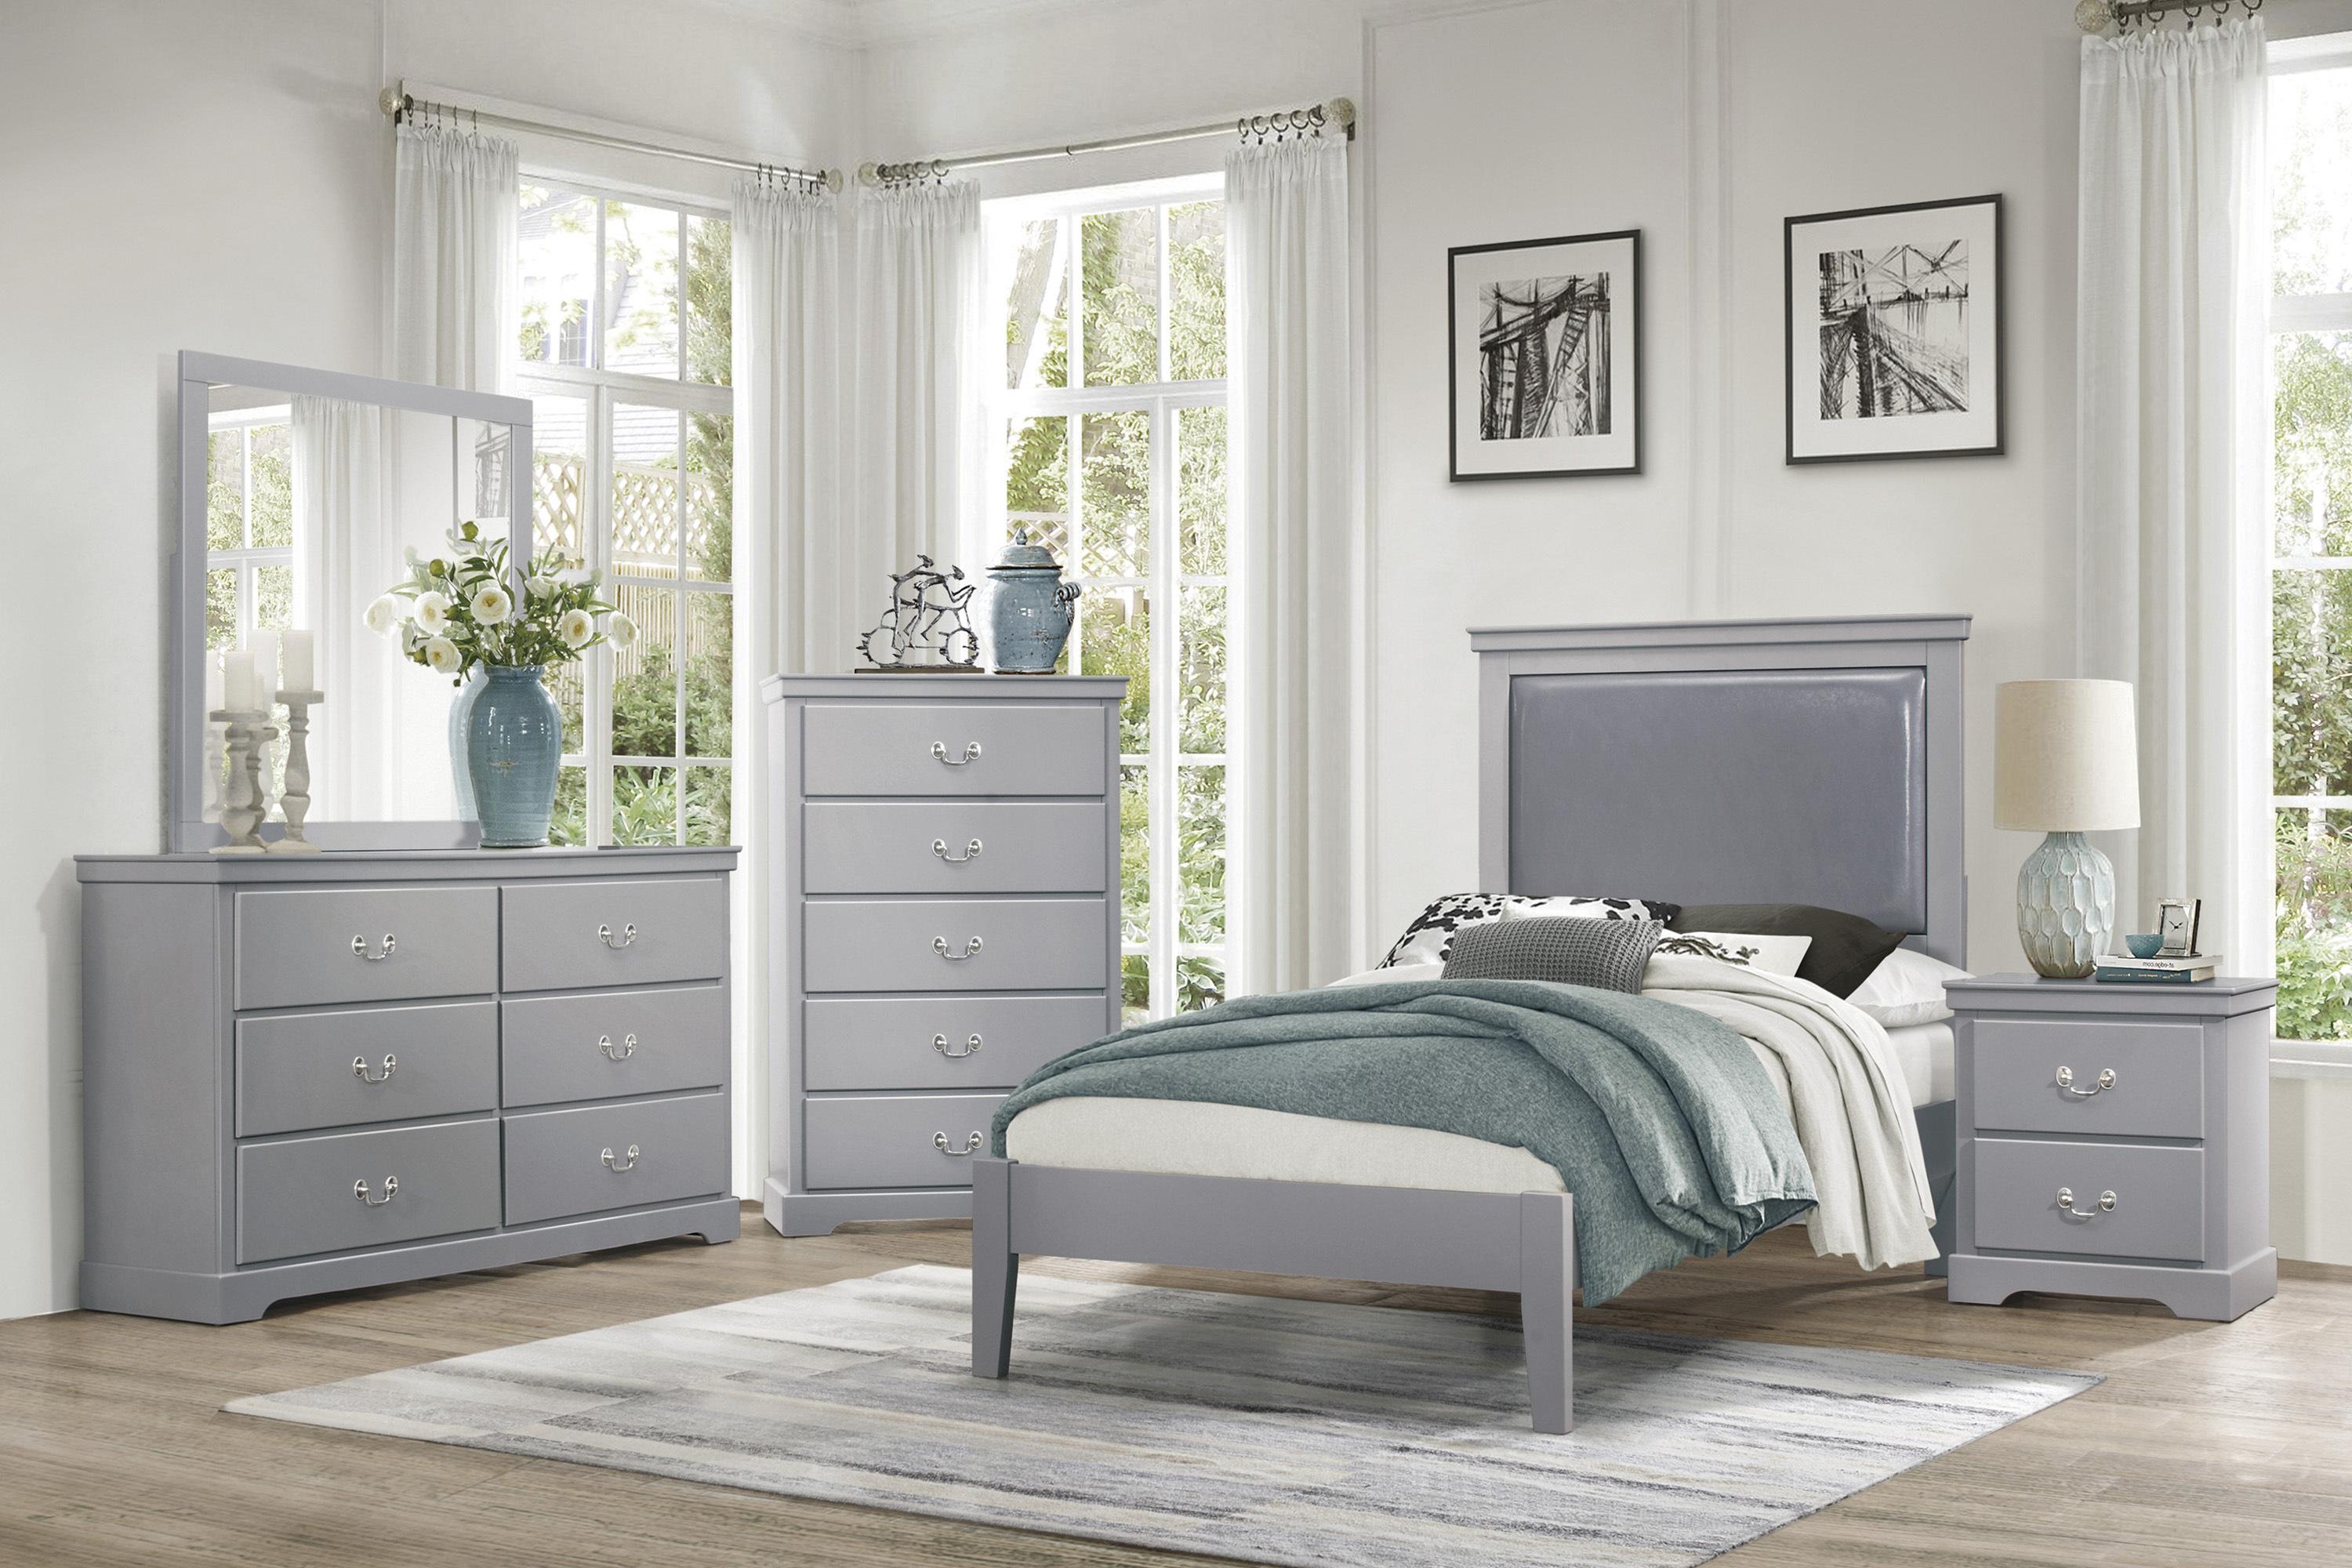 Modern Bedroom Set 1519GYT-1-6PC Seabright 1519GYT-1-6PC in Gray Faux Leather